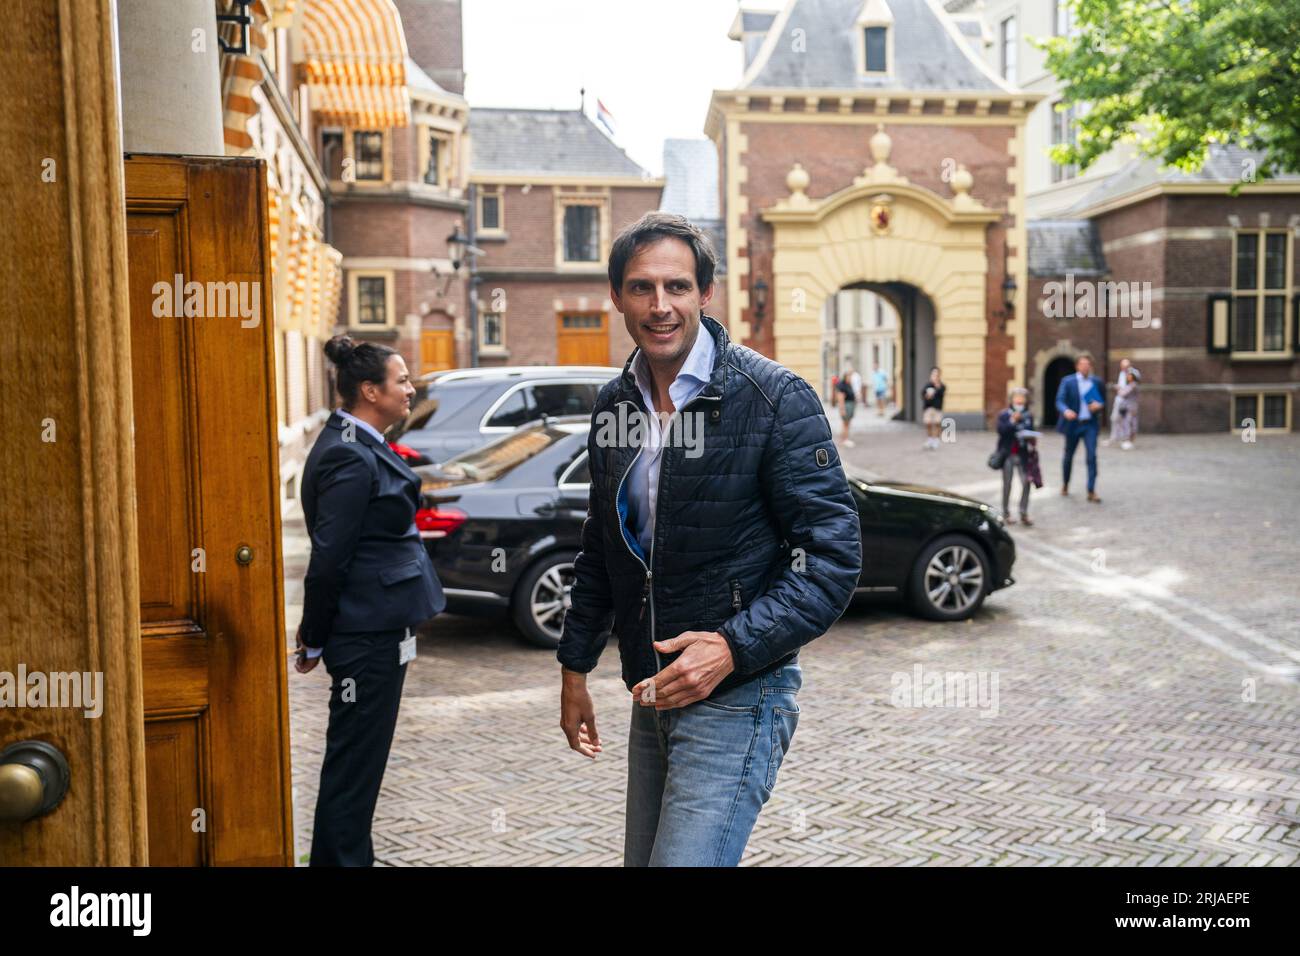 THE HAGUE - Minister Wobke Hoekstra arrives at the Ministry of General Affairs at the Binnenhof for the first budget council. Ministers discuss the budget for the coming year, in the run-up to Prinsjesdag. ANP JEROEN JUMELET netherlands out - belgium out Stock Photo